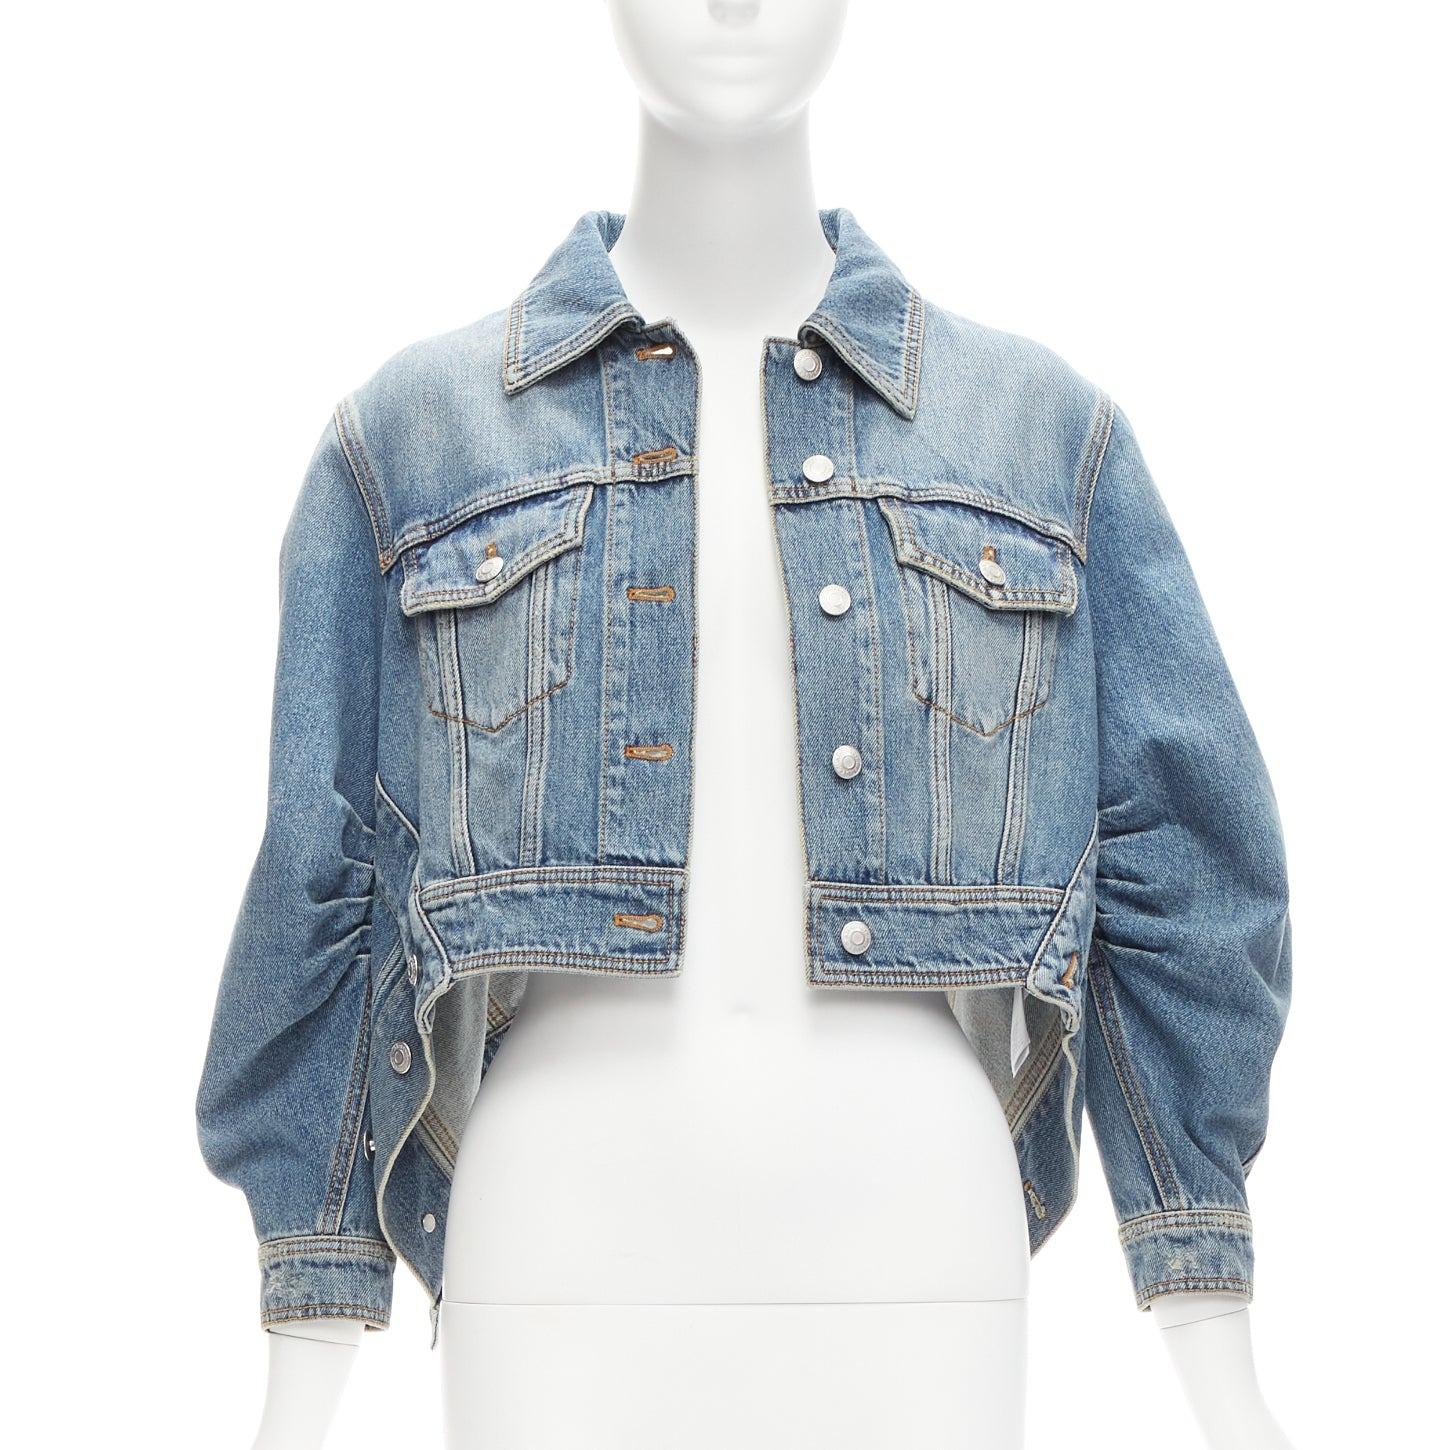 ALEXANDER MCQUEEN blue denim deconstructed puff sleeves cropped jacket IT38 XS
Reference: NKLL/A00014
Brand: Alexander McQueen
Designer: Sarah Burton
Material: Denim
Color: Blue
Pattern: Solid
Closure: Button
Extra Details: Deconstructed panelled